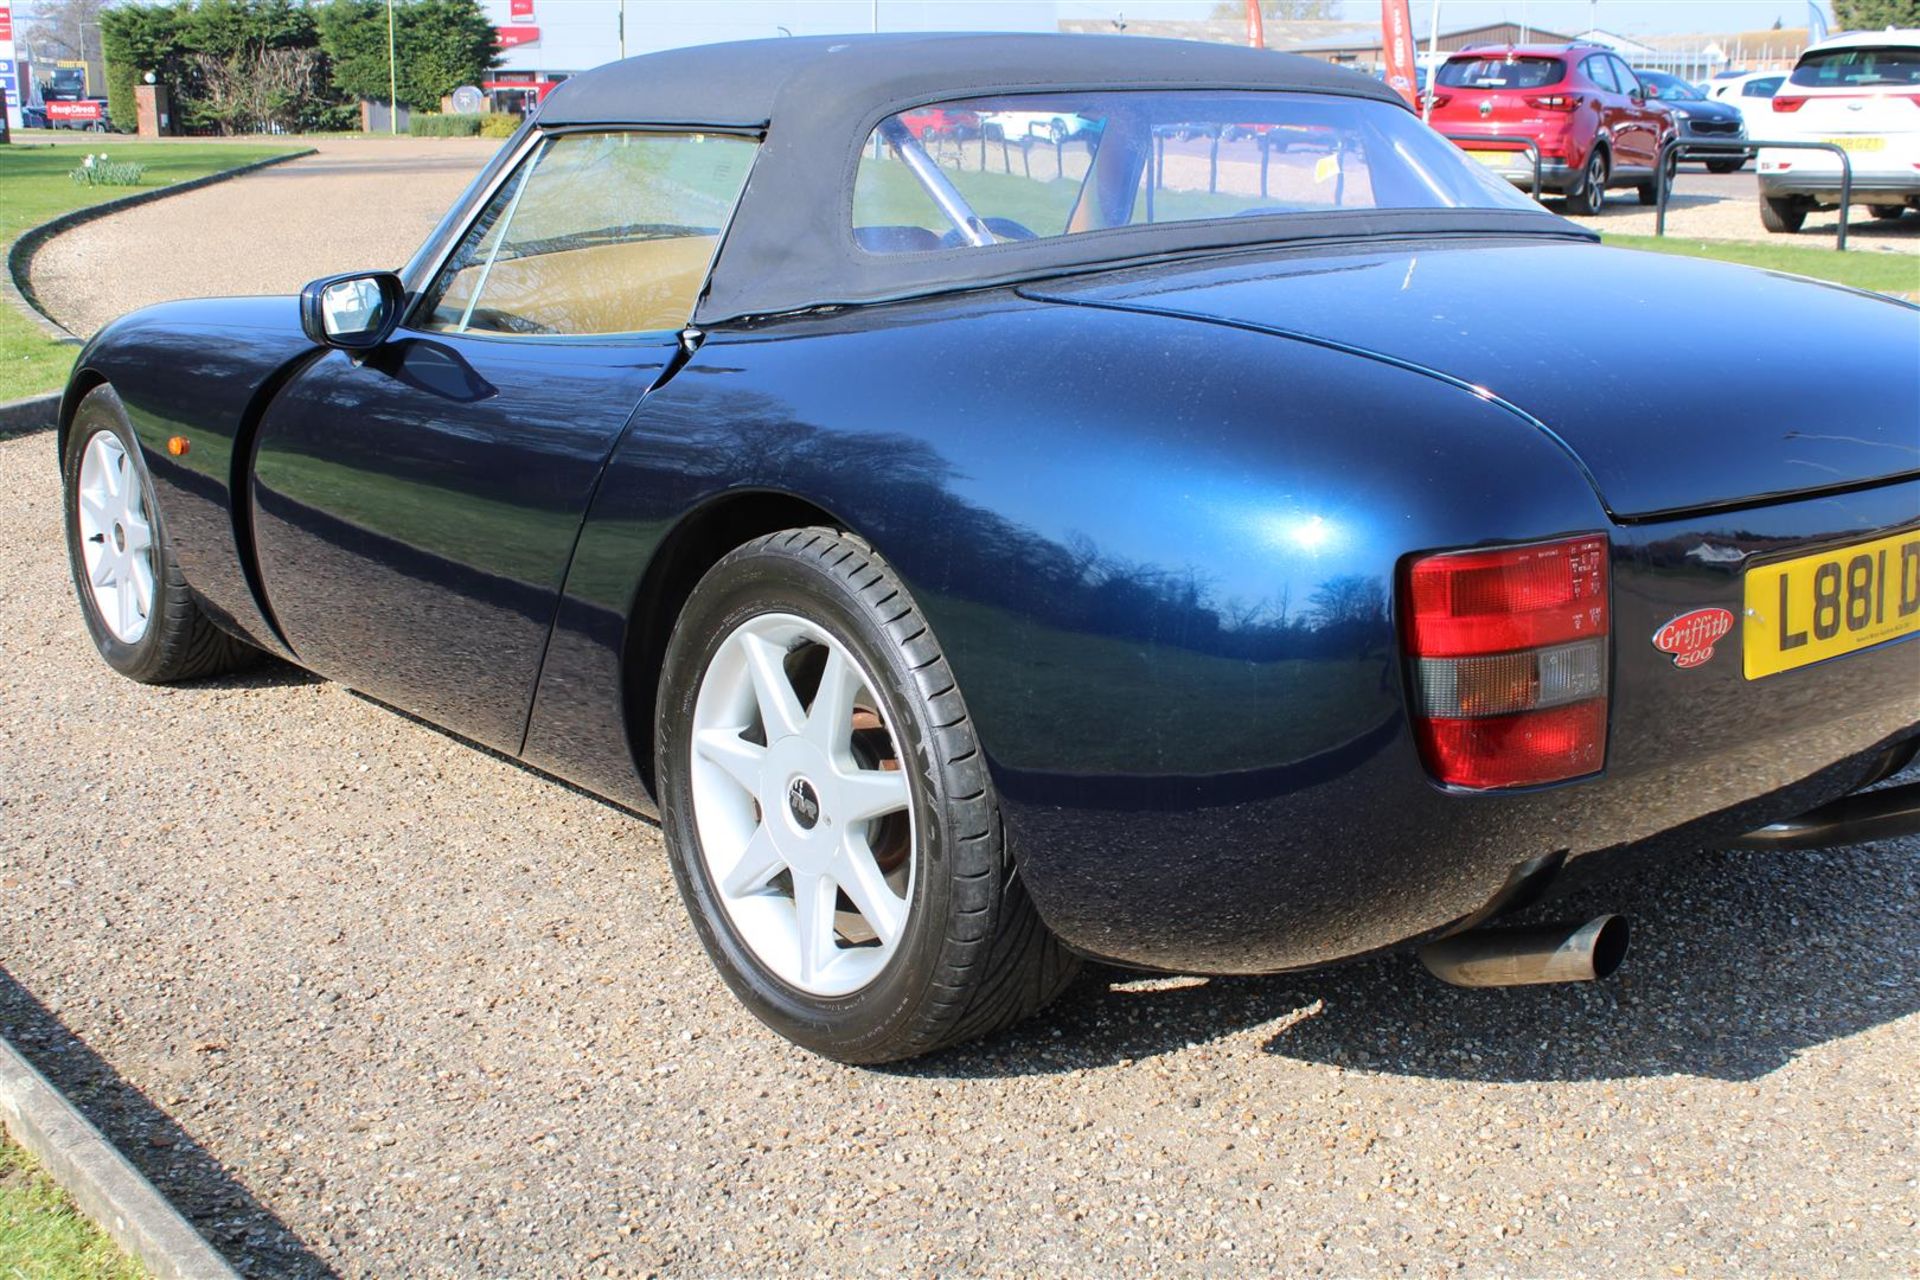 1993 TVR Griffith 500 - Image 11 of 19